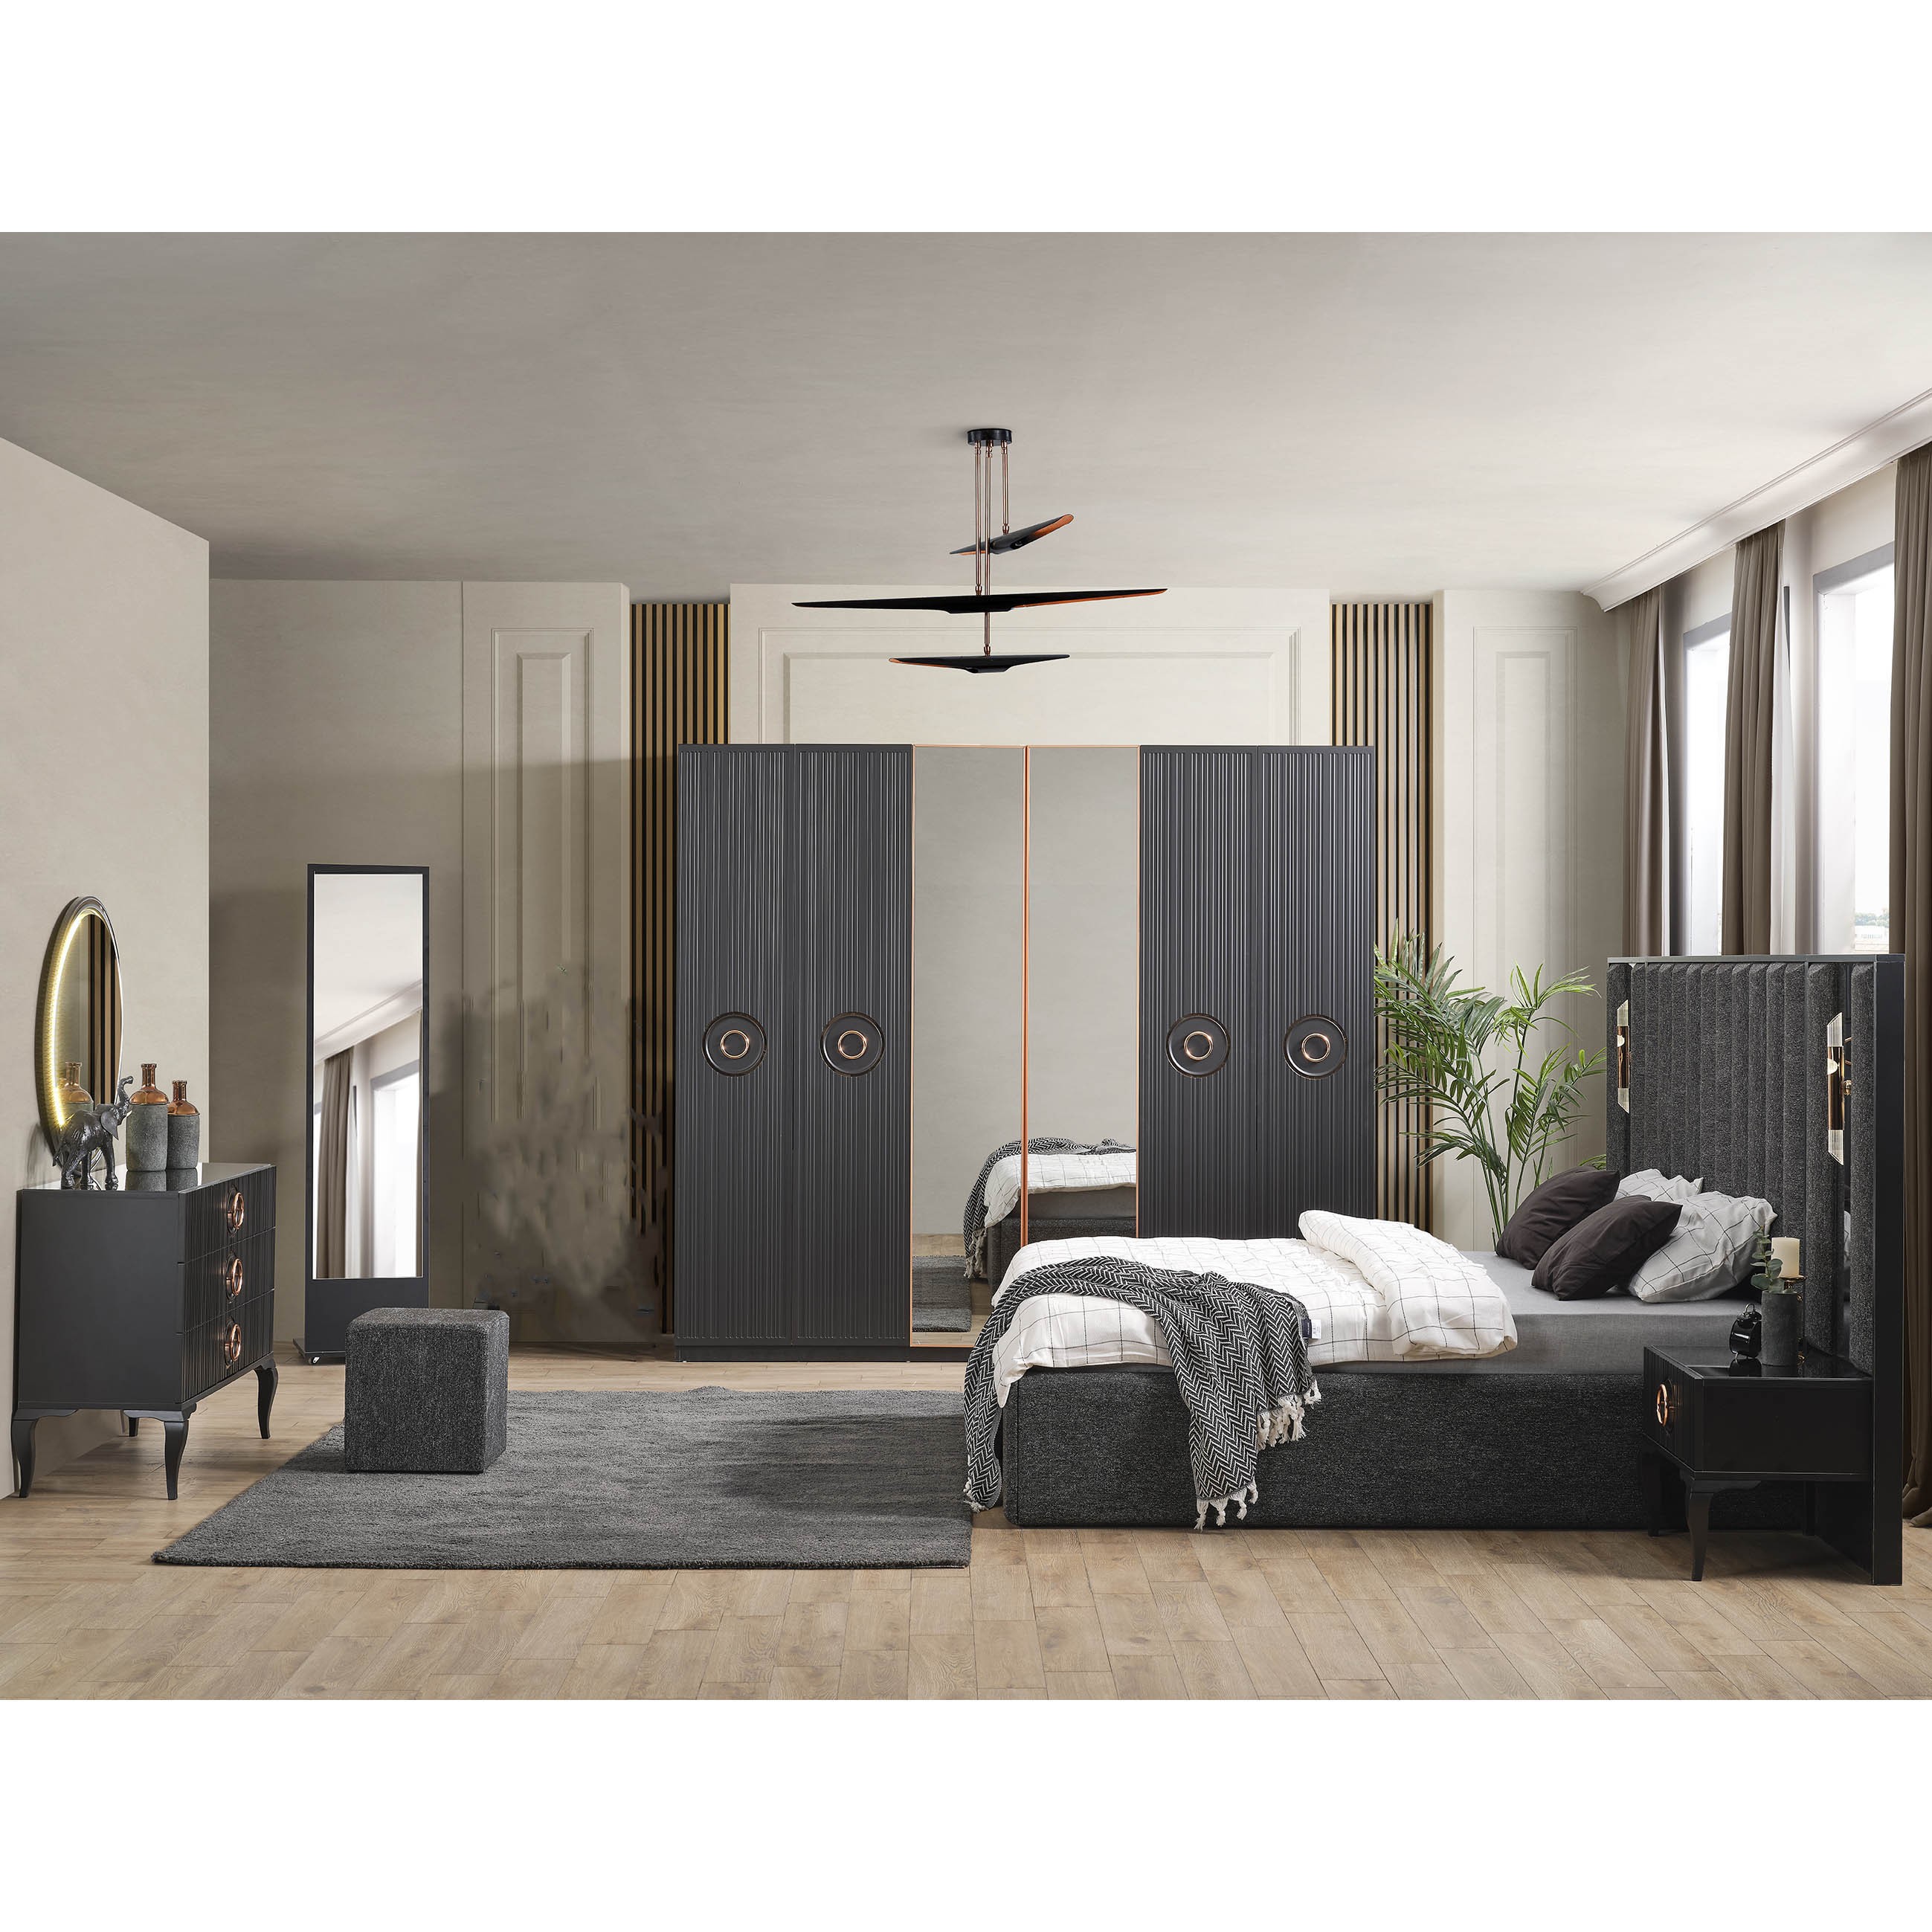 Style Larissa Bedroom Vol2 (Bed Without Storage 180x200cm)